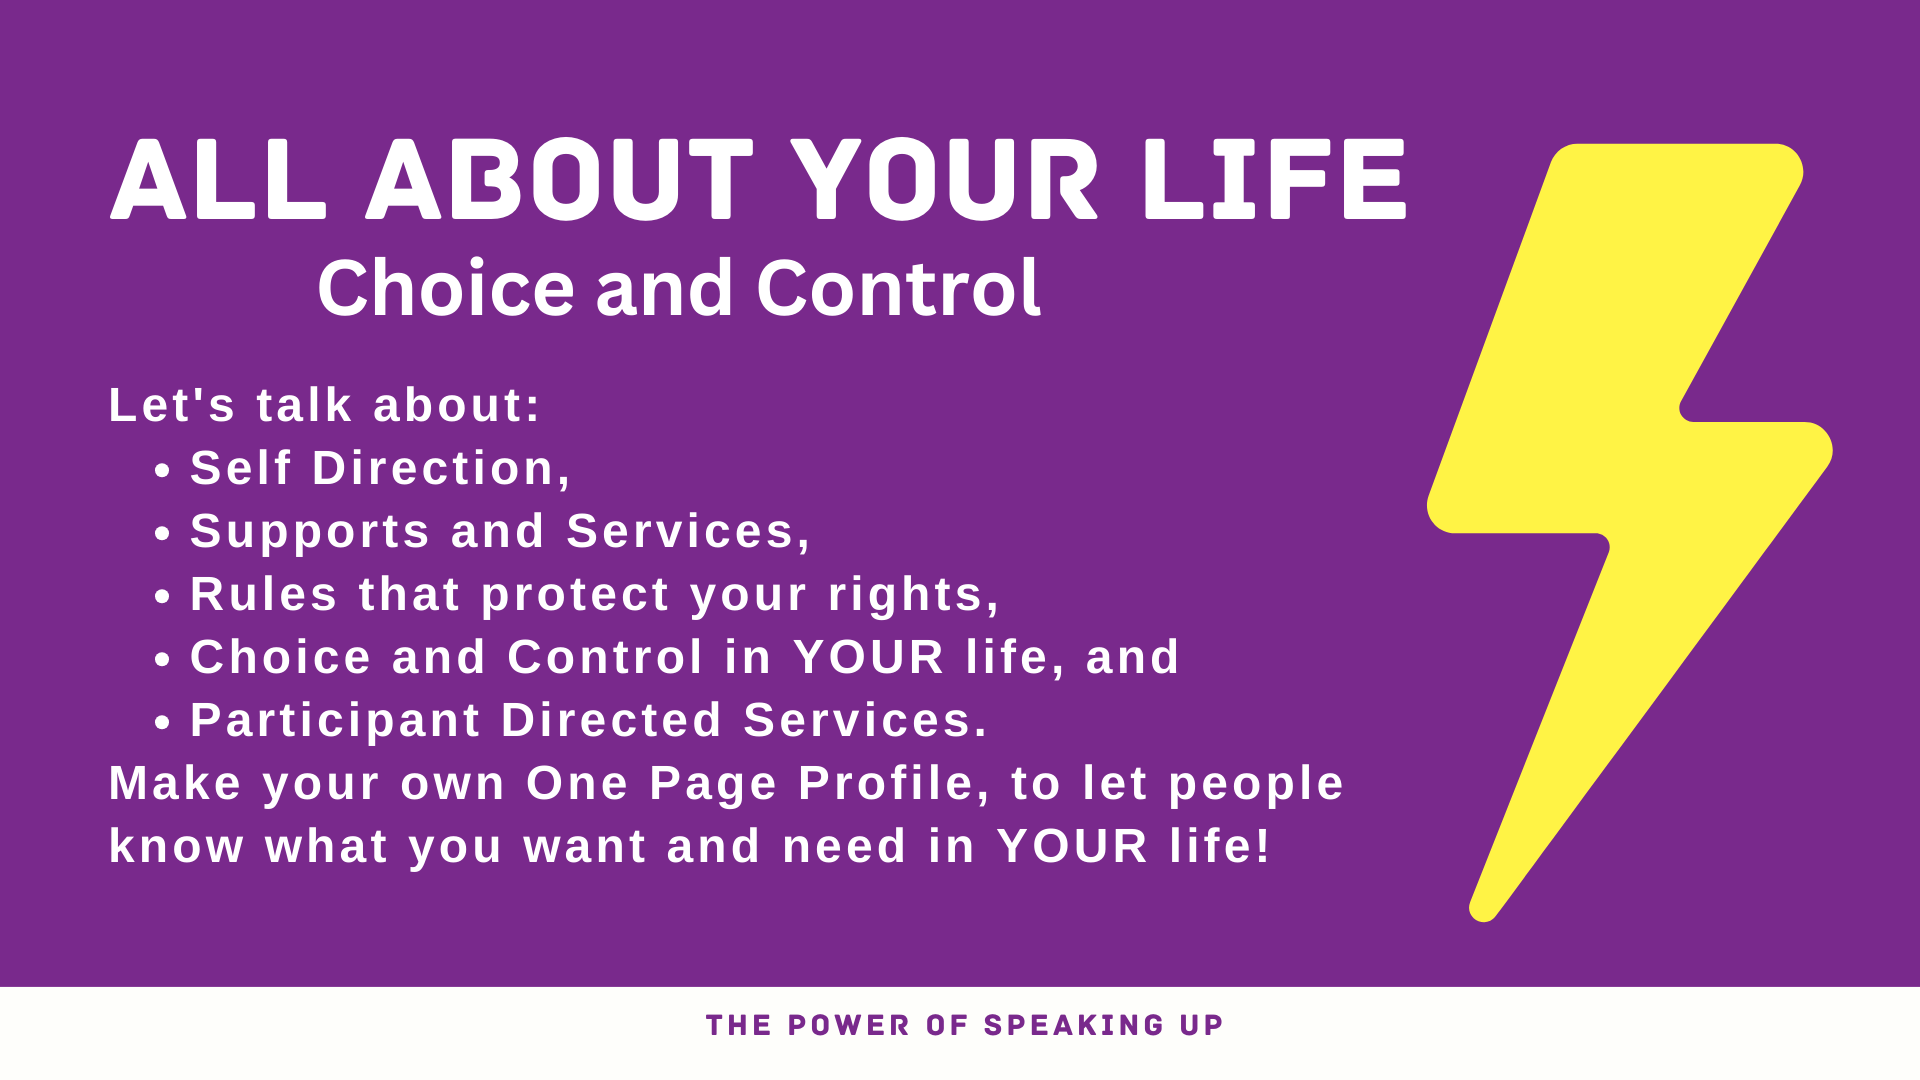 Banner. Text reads: ALL ABOUT YOUR LIFE Choice and Control Let's talk about: Self Direction, Supports and Services, Rules that protect your rights,  Choice and Control in YOUR life, and Participant Directed Services. Make your own One Page Profile, to let people know what you want and need in YOUR life! THE POWER OF SPEAKING UP